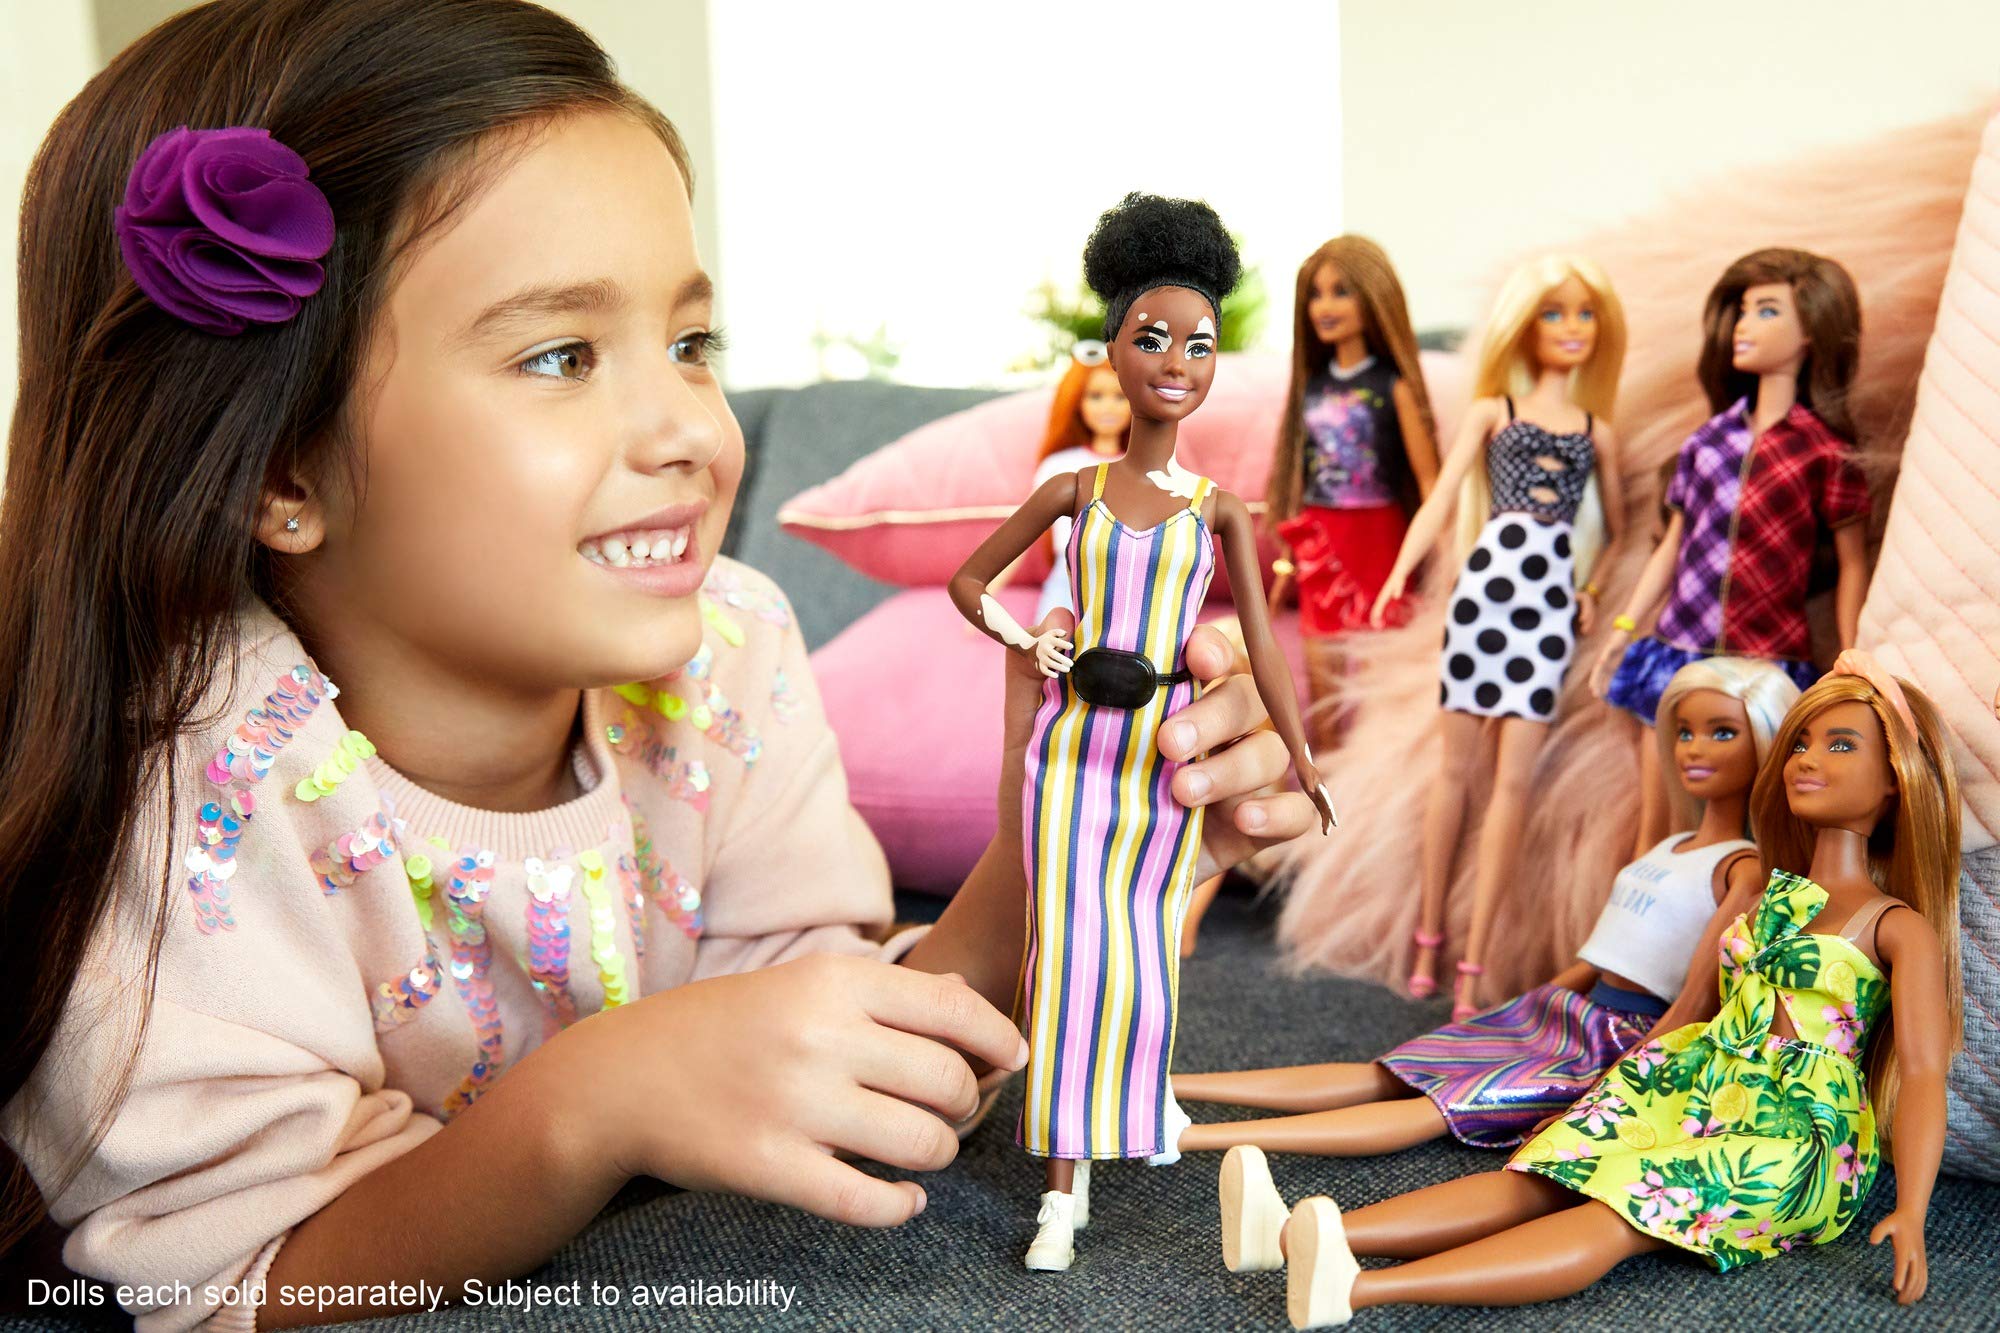 Barbie Fashionistas Doll with Vitiligo and Curly Brunette Hair Wearing Striped Dress and Accessories, for 3 to 8 Year Olds​